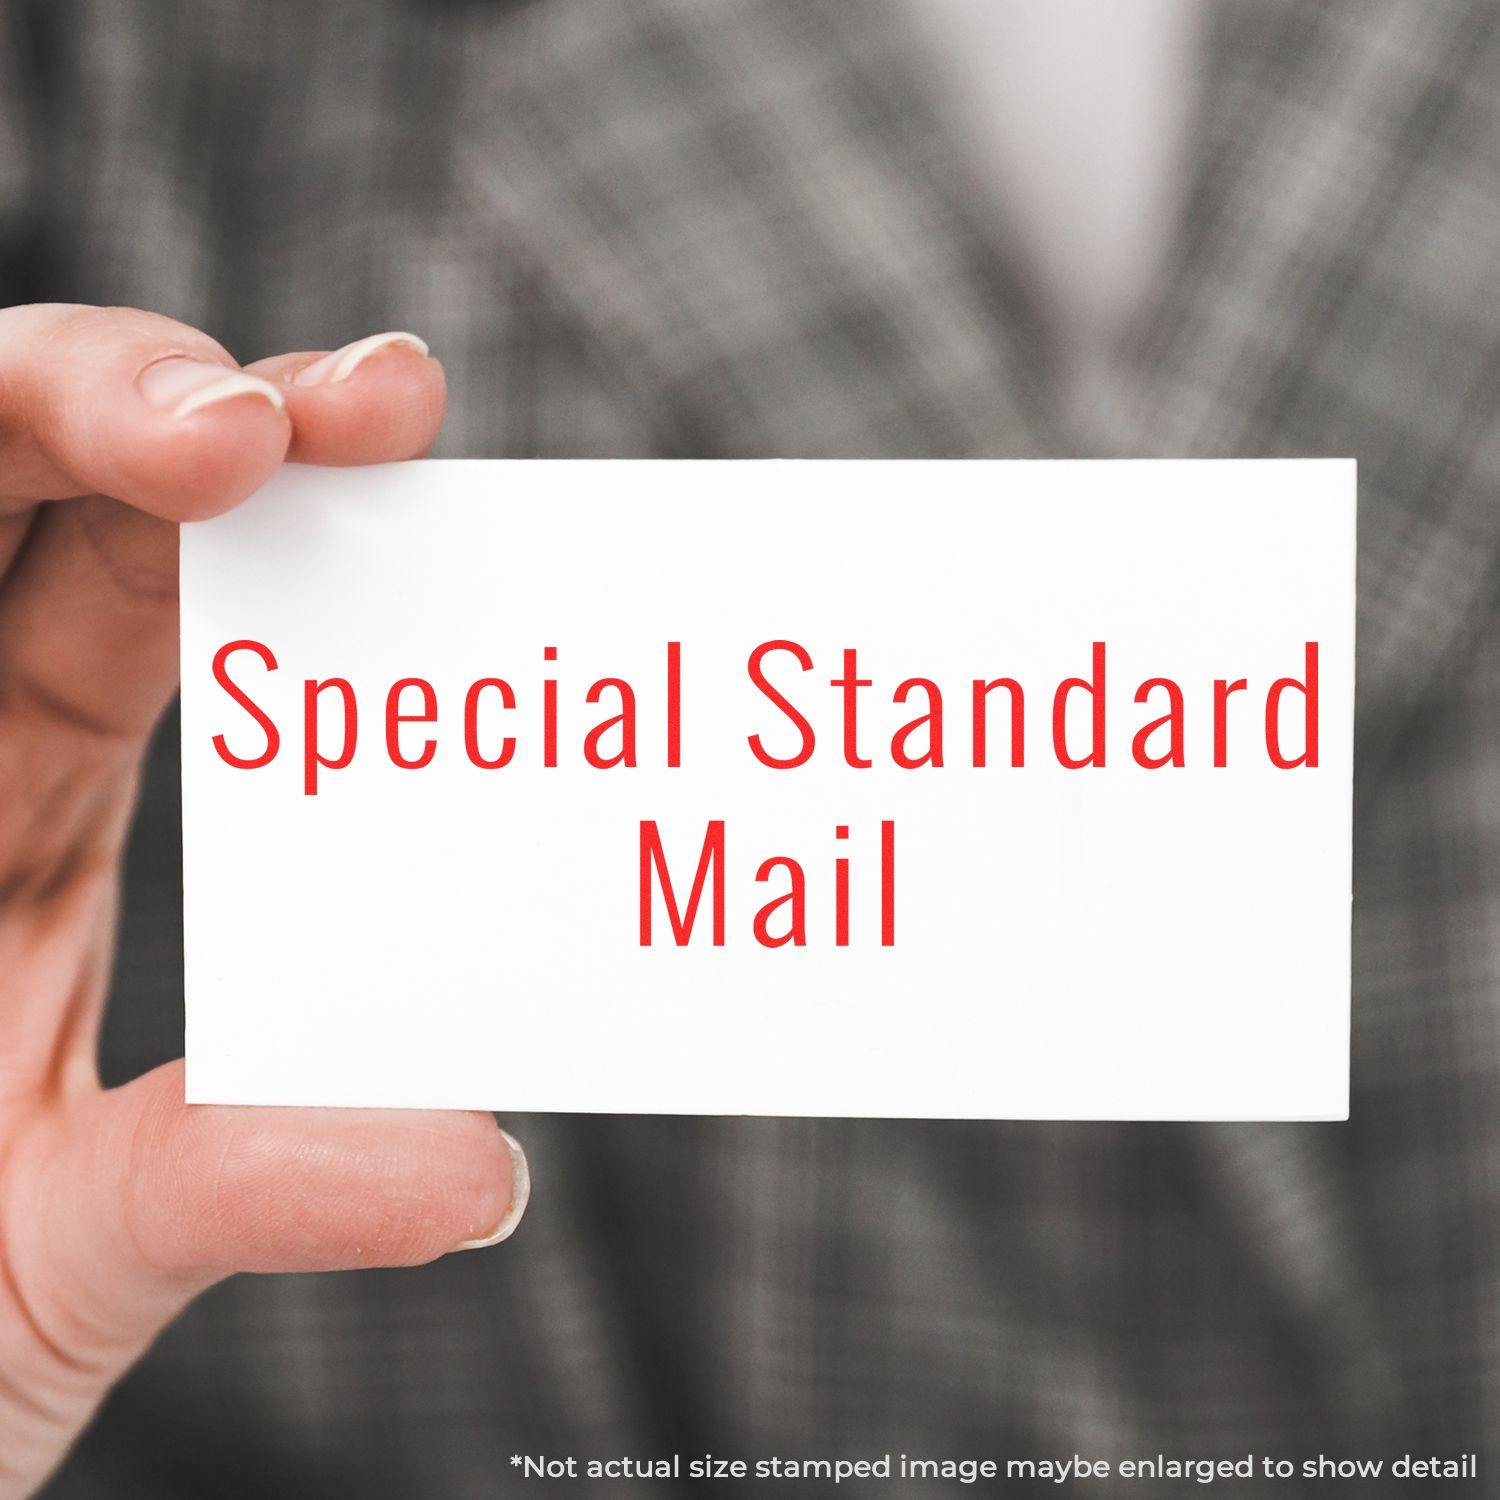 A self-inking stamp with a stamped image showing how the text "Special Standard Mail" in a large narrow font is displayed by it after stamping.